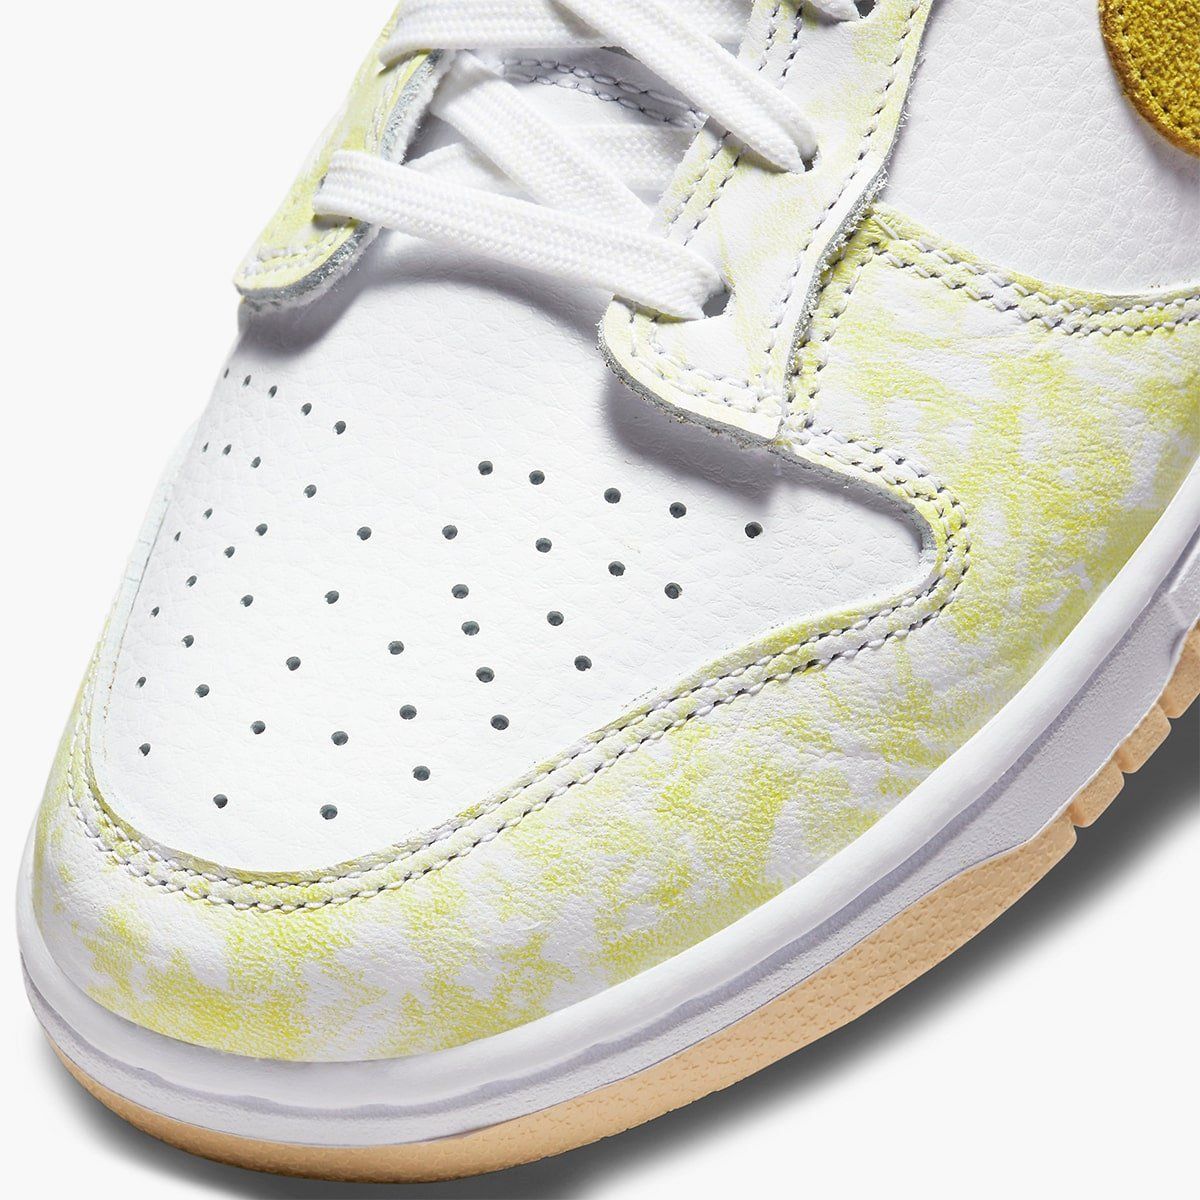 Nike Dunk Low "Yellow Strike" Now Arrives on August 18th | HOUSE OF HEAT